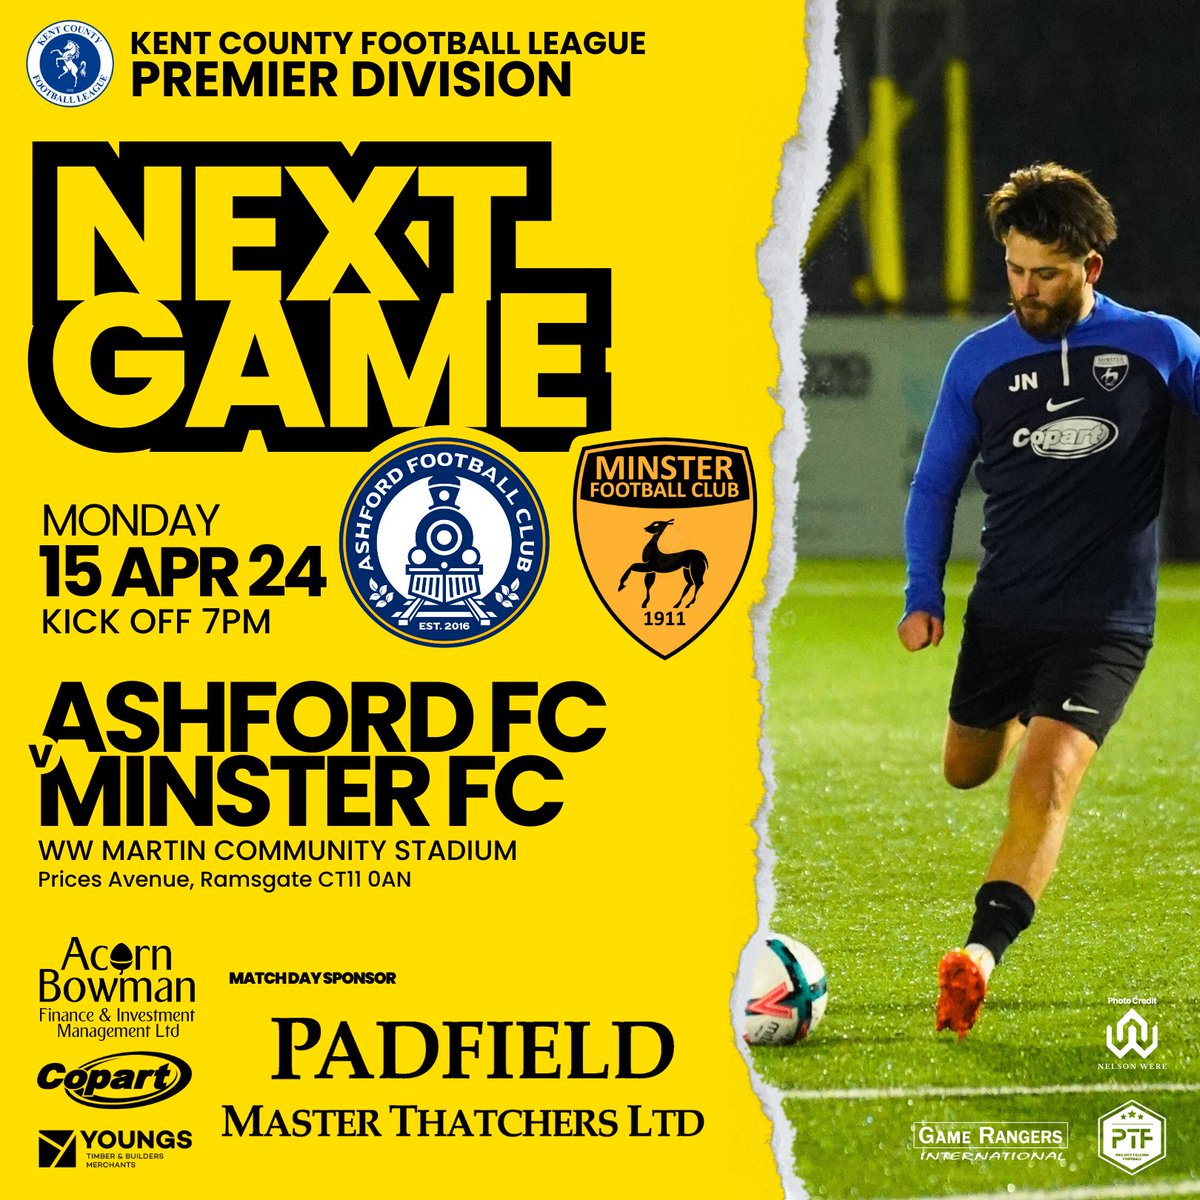 FIRST TEAM : NEXT GAME
 🆚 @Ashford_FC2016
🏆 @KCFL1516 Premier Division
📅 MONDAY NIGHT 15 APR 24
⏰ 7pm Kick off 
🏟️ Southwood Stadium 
📍CT11 0AN

It's an away game for us!
@mjpadfield Master Thatchers
#AcornBowmanFinance
@CopartUKLimited
#YoungsTBM
#grassrootsfootball #mcmxi